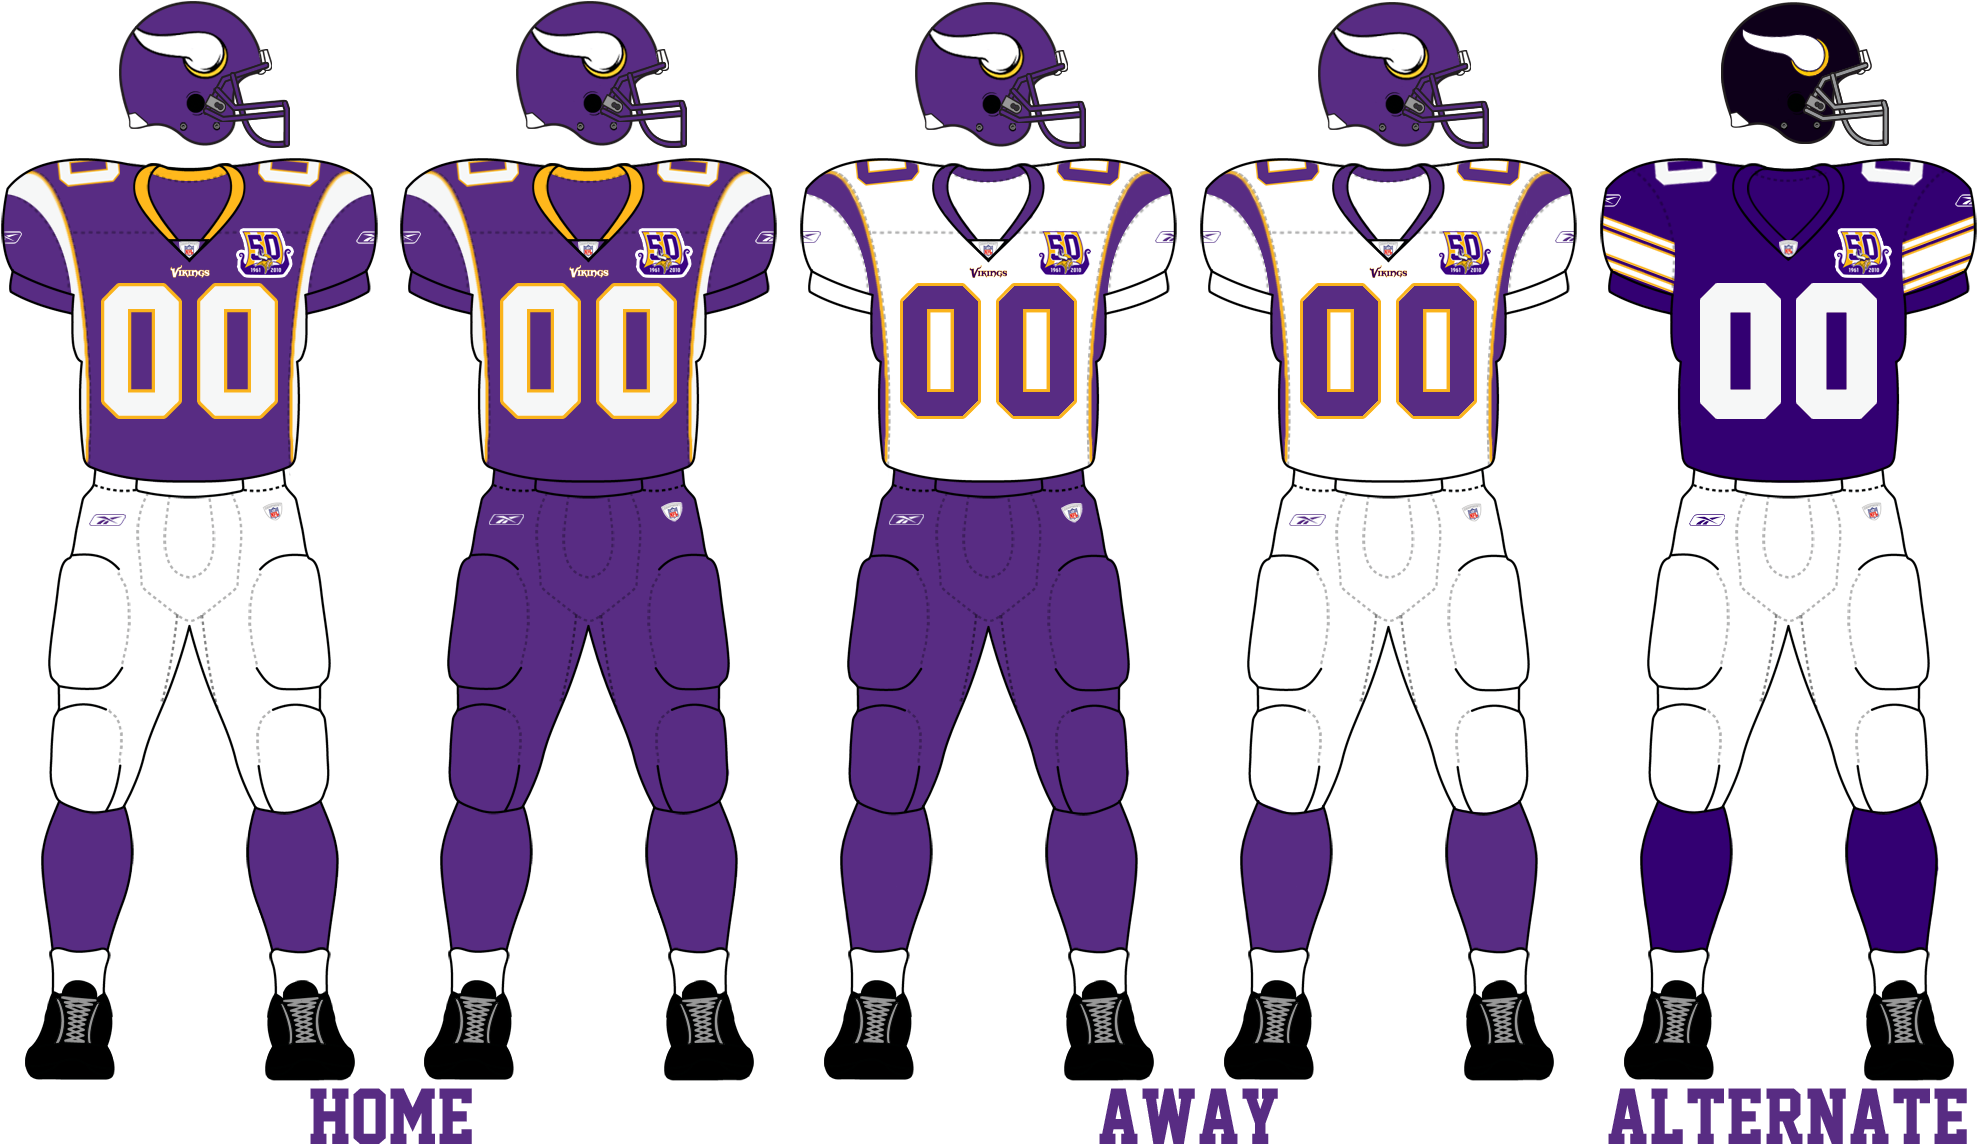 A Football Uniform With Purple And White Colors